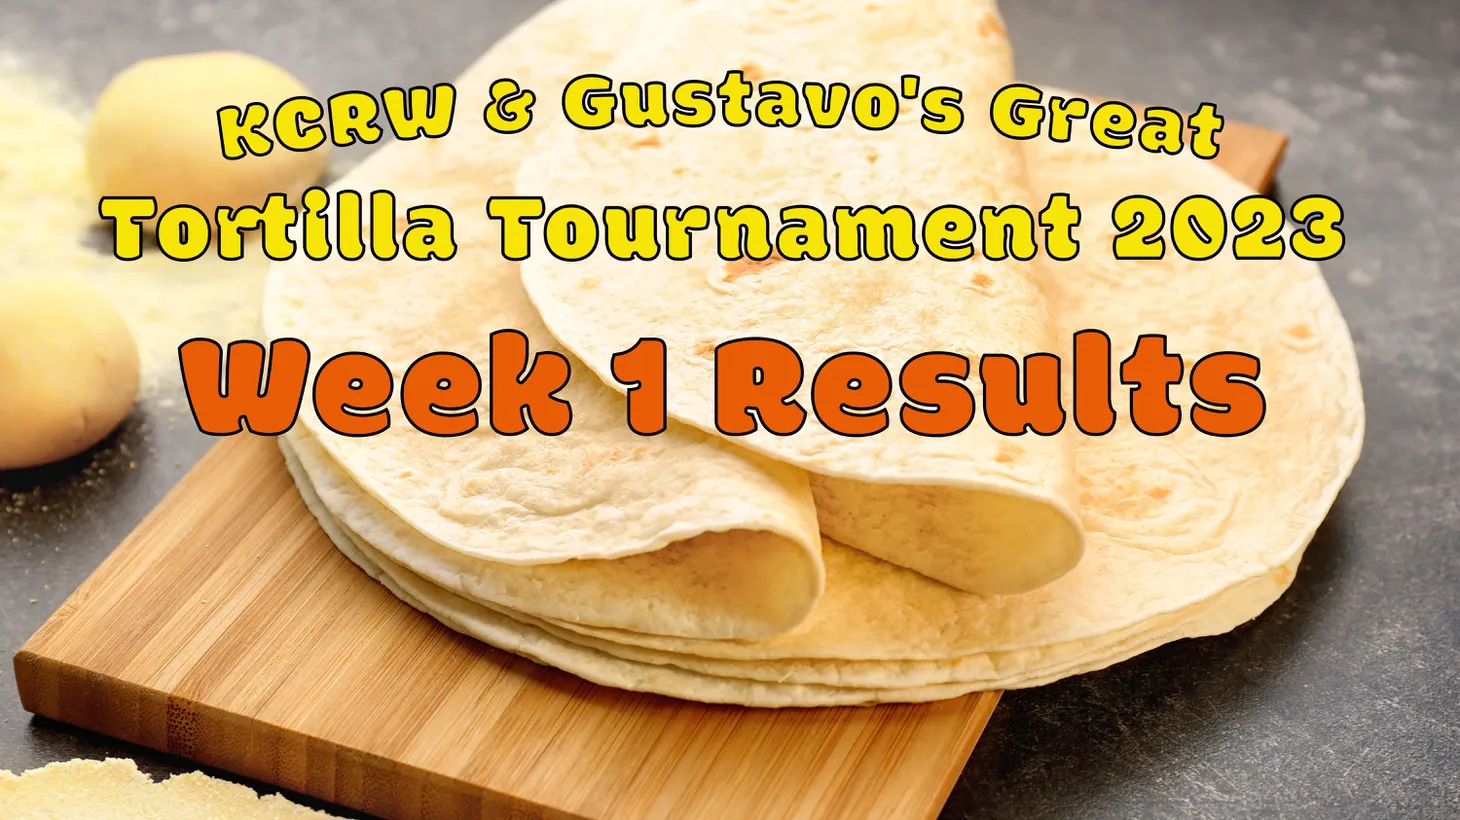 Read all about it! Read all about it! The tortilla battle has begun!